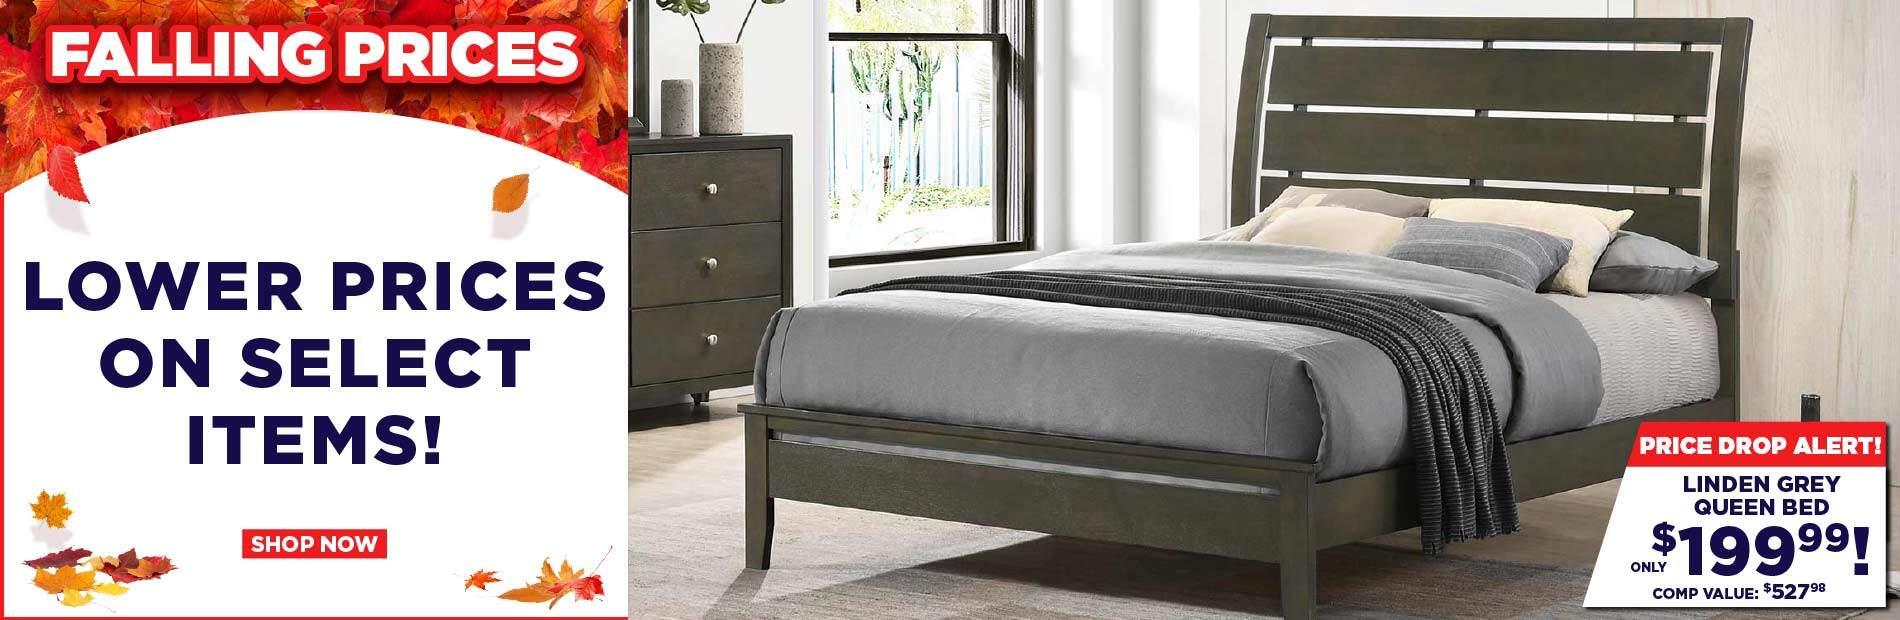 Falling Prices. Lower Prices on select items! Shop Now. Price Drop Alert! Lacy Grey Queen Bed only $199.99! comp value $527.98